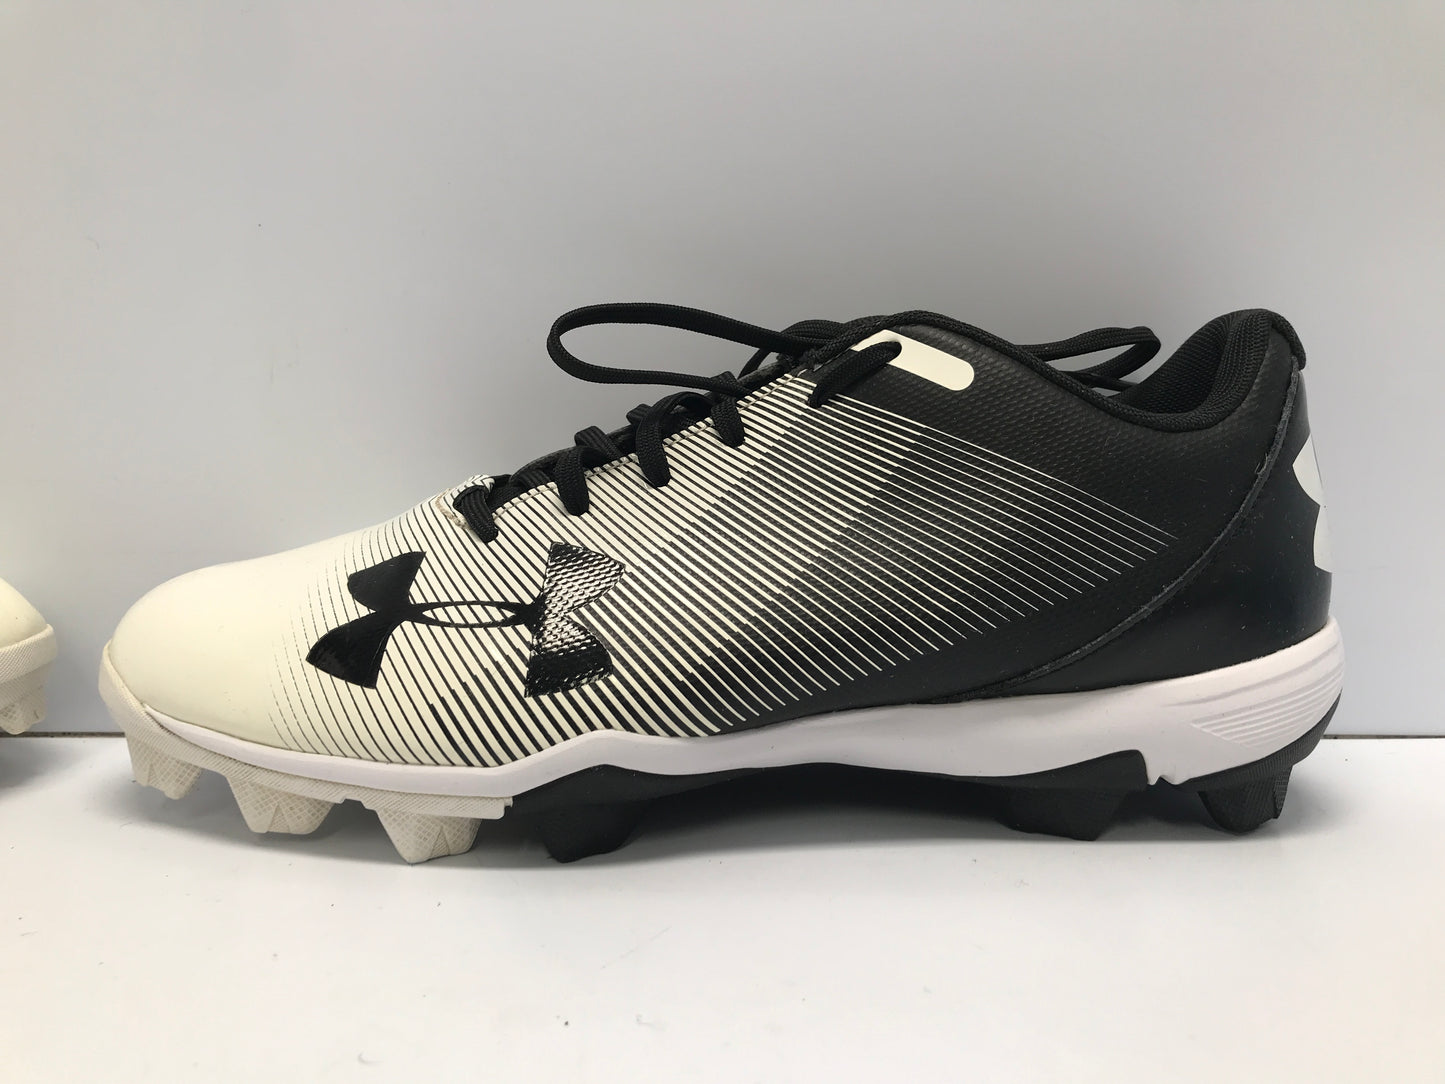 Baseball Shoes Cleats Men's Size 9.5 Under Armour Black White Like New